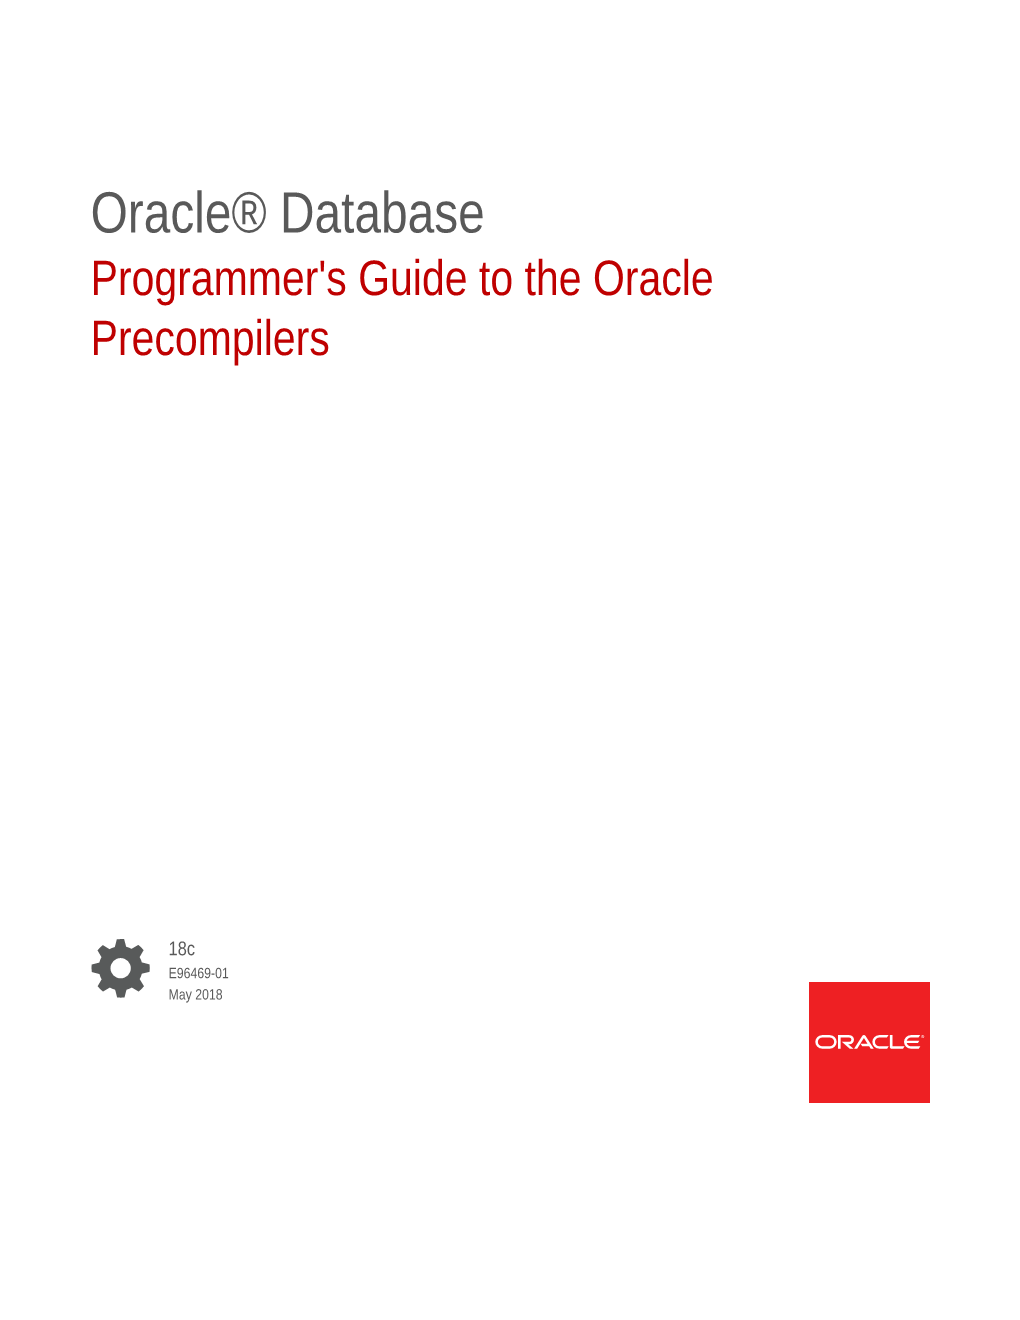 Programmer's Guide to the Oracle Precompilers